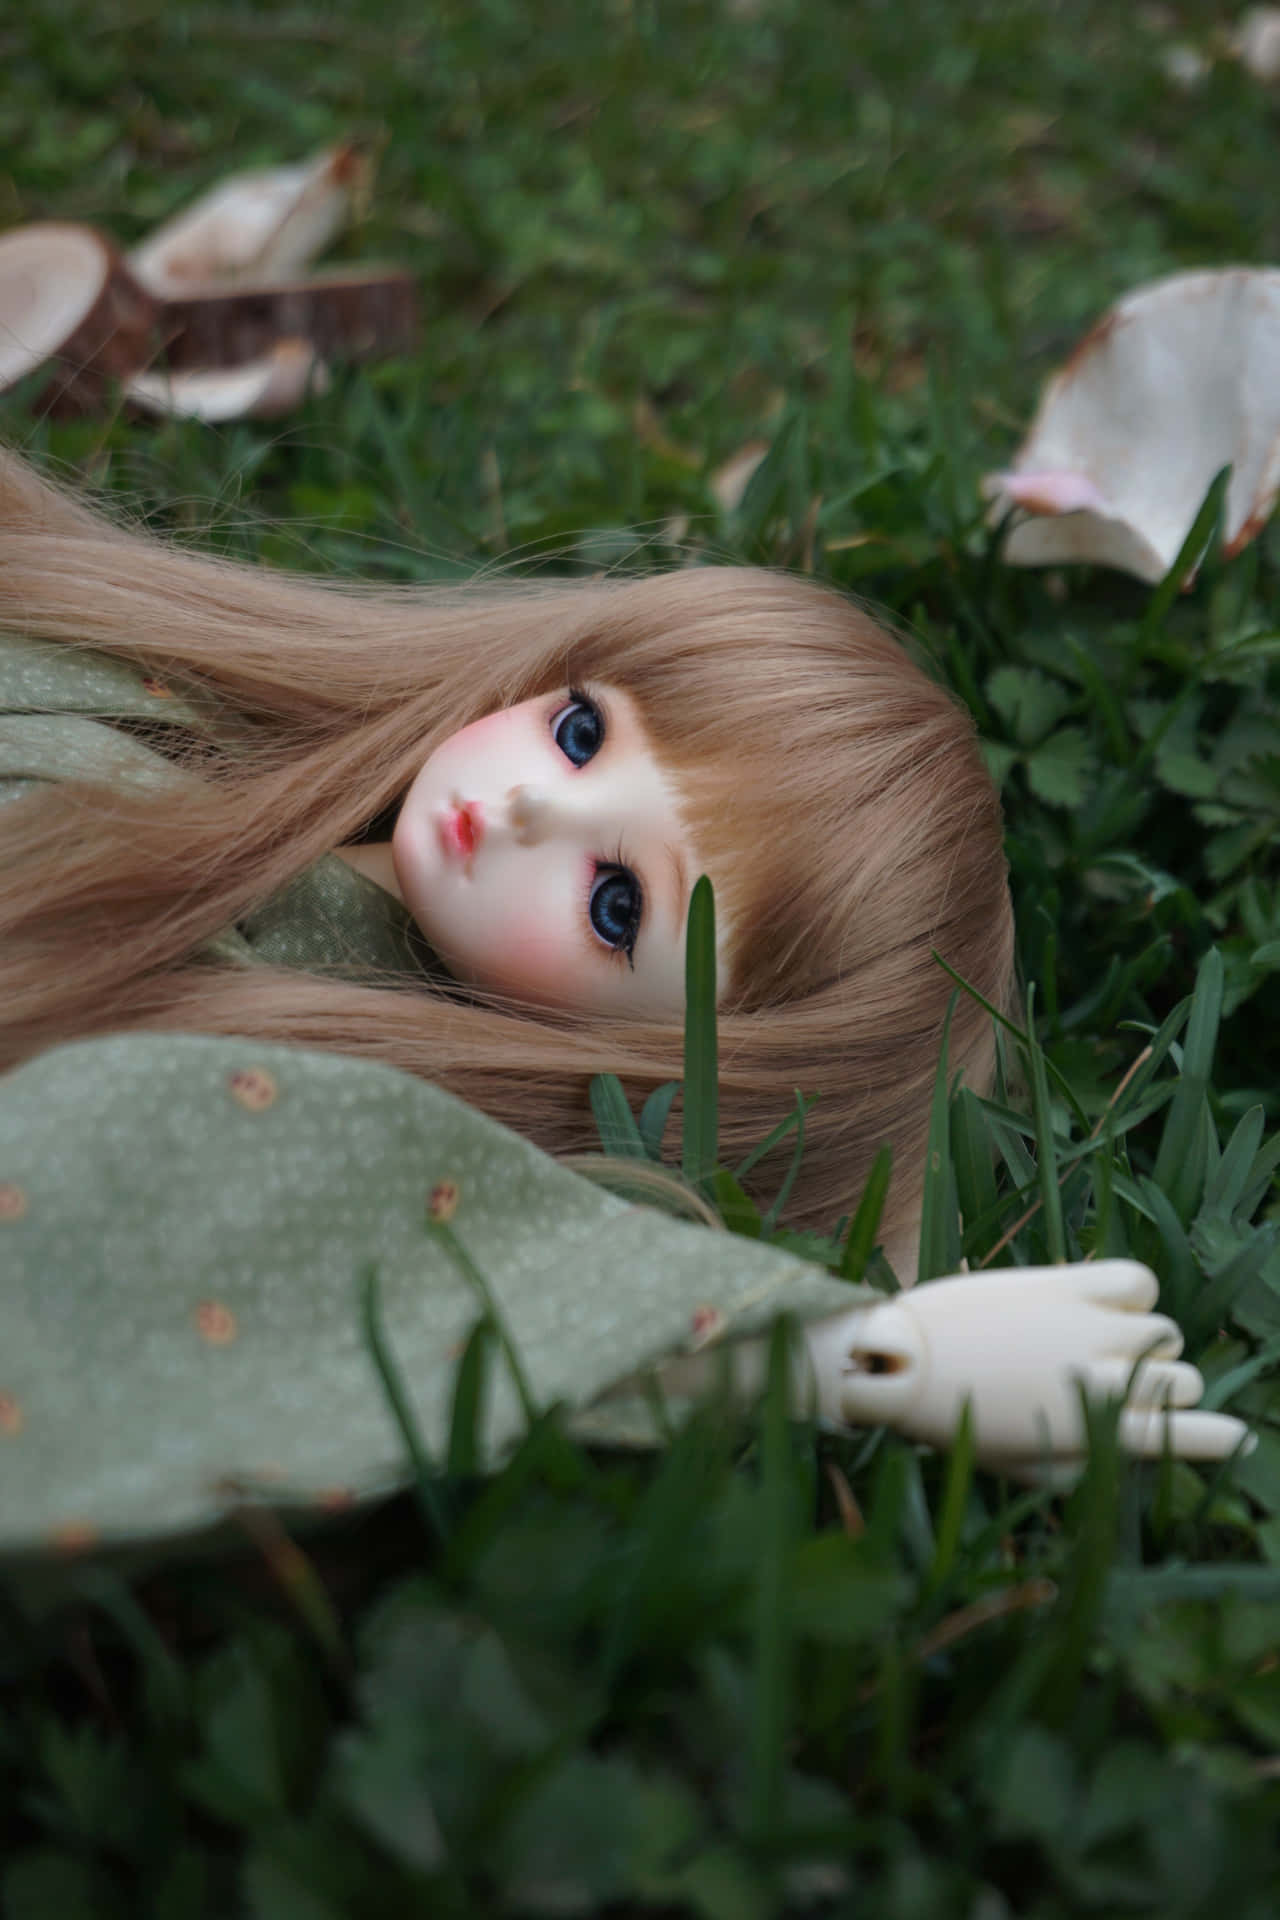 A Charming Collection of Handcrafted Dolls